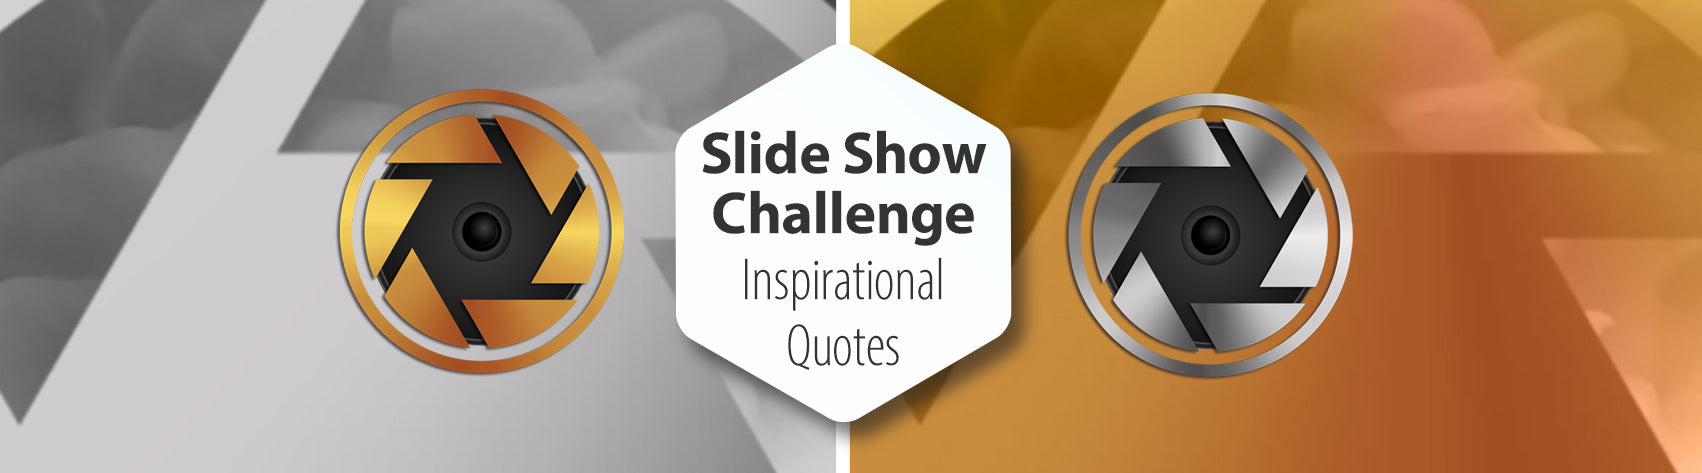 Slide Show Challenge - Inspirational Quotes